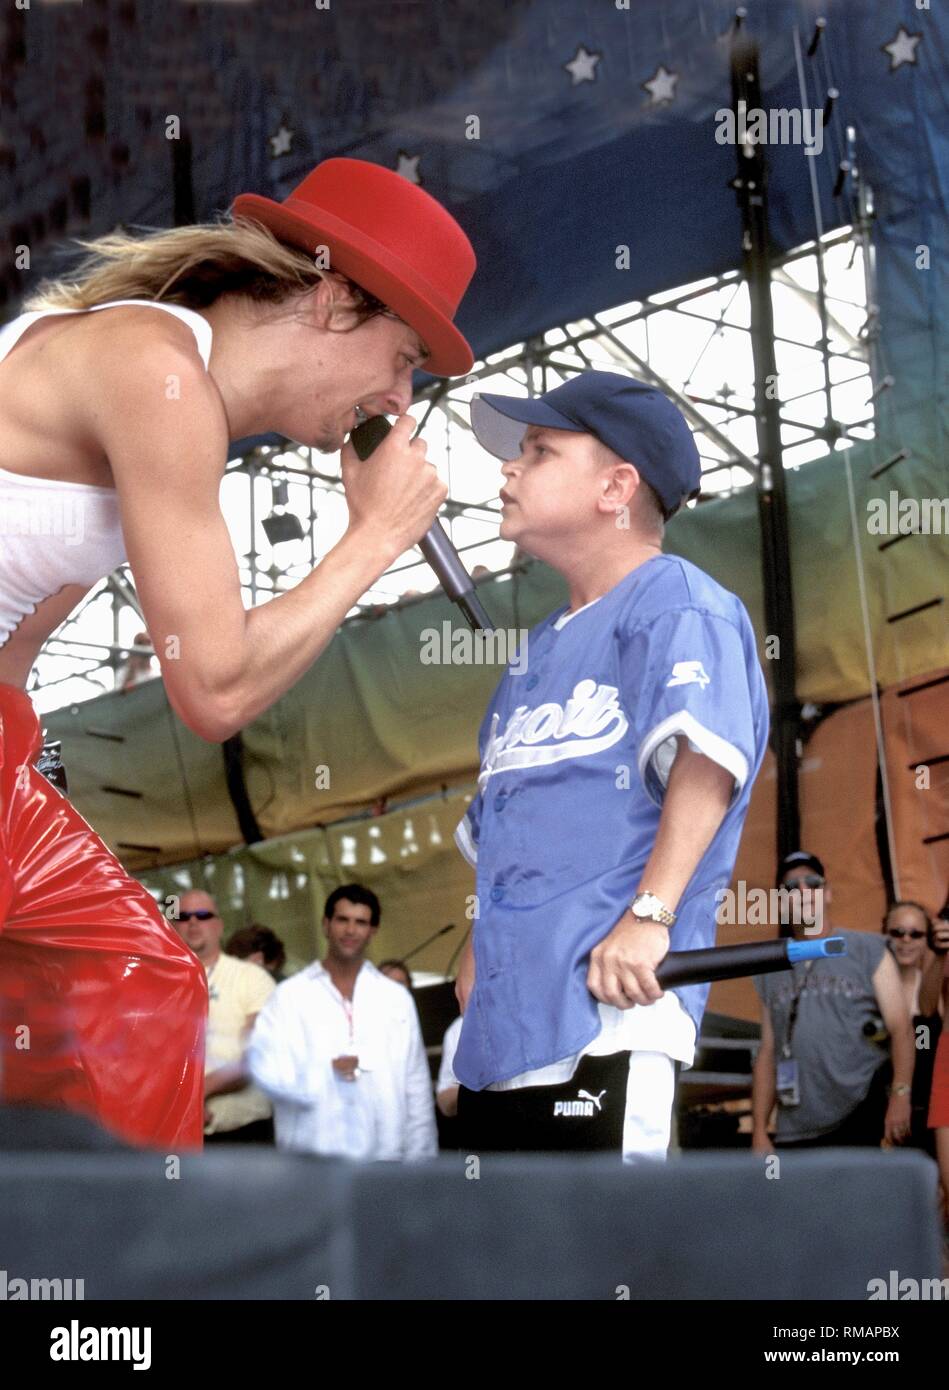 Singer and rapper Joe C. of the Kid Rock band is shown performing on stage at Wookdstock '99 in Rome, New York. Stock Photo